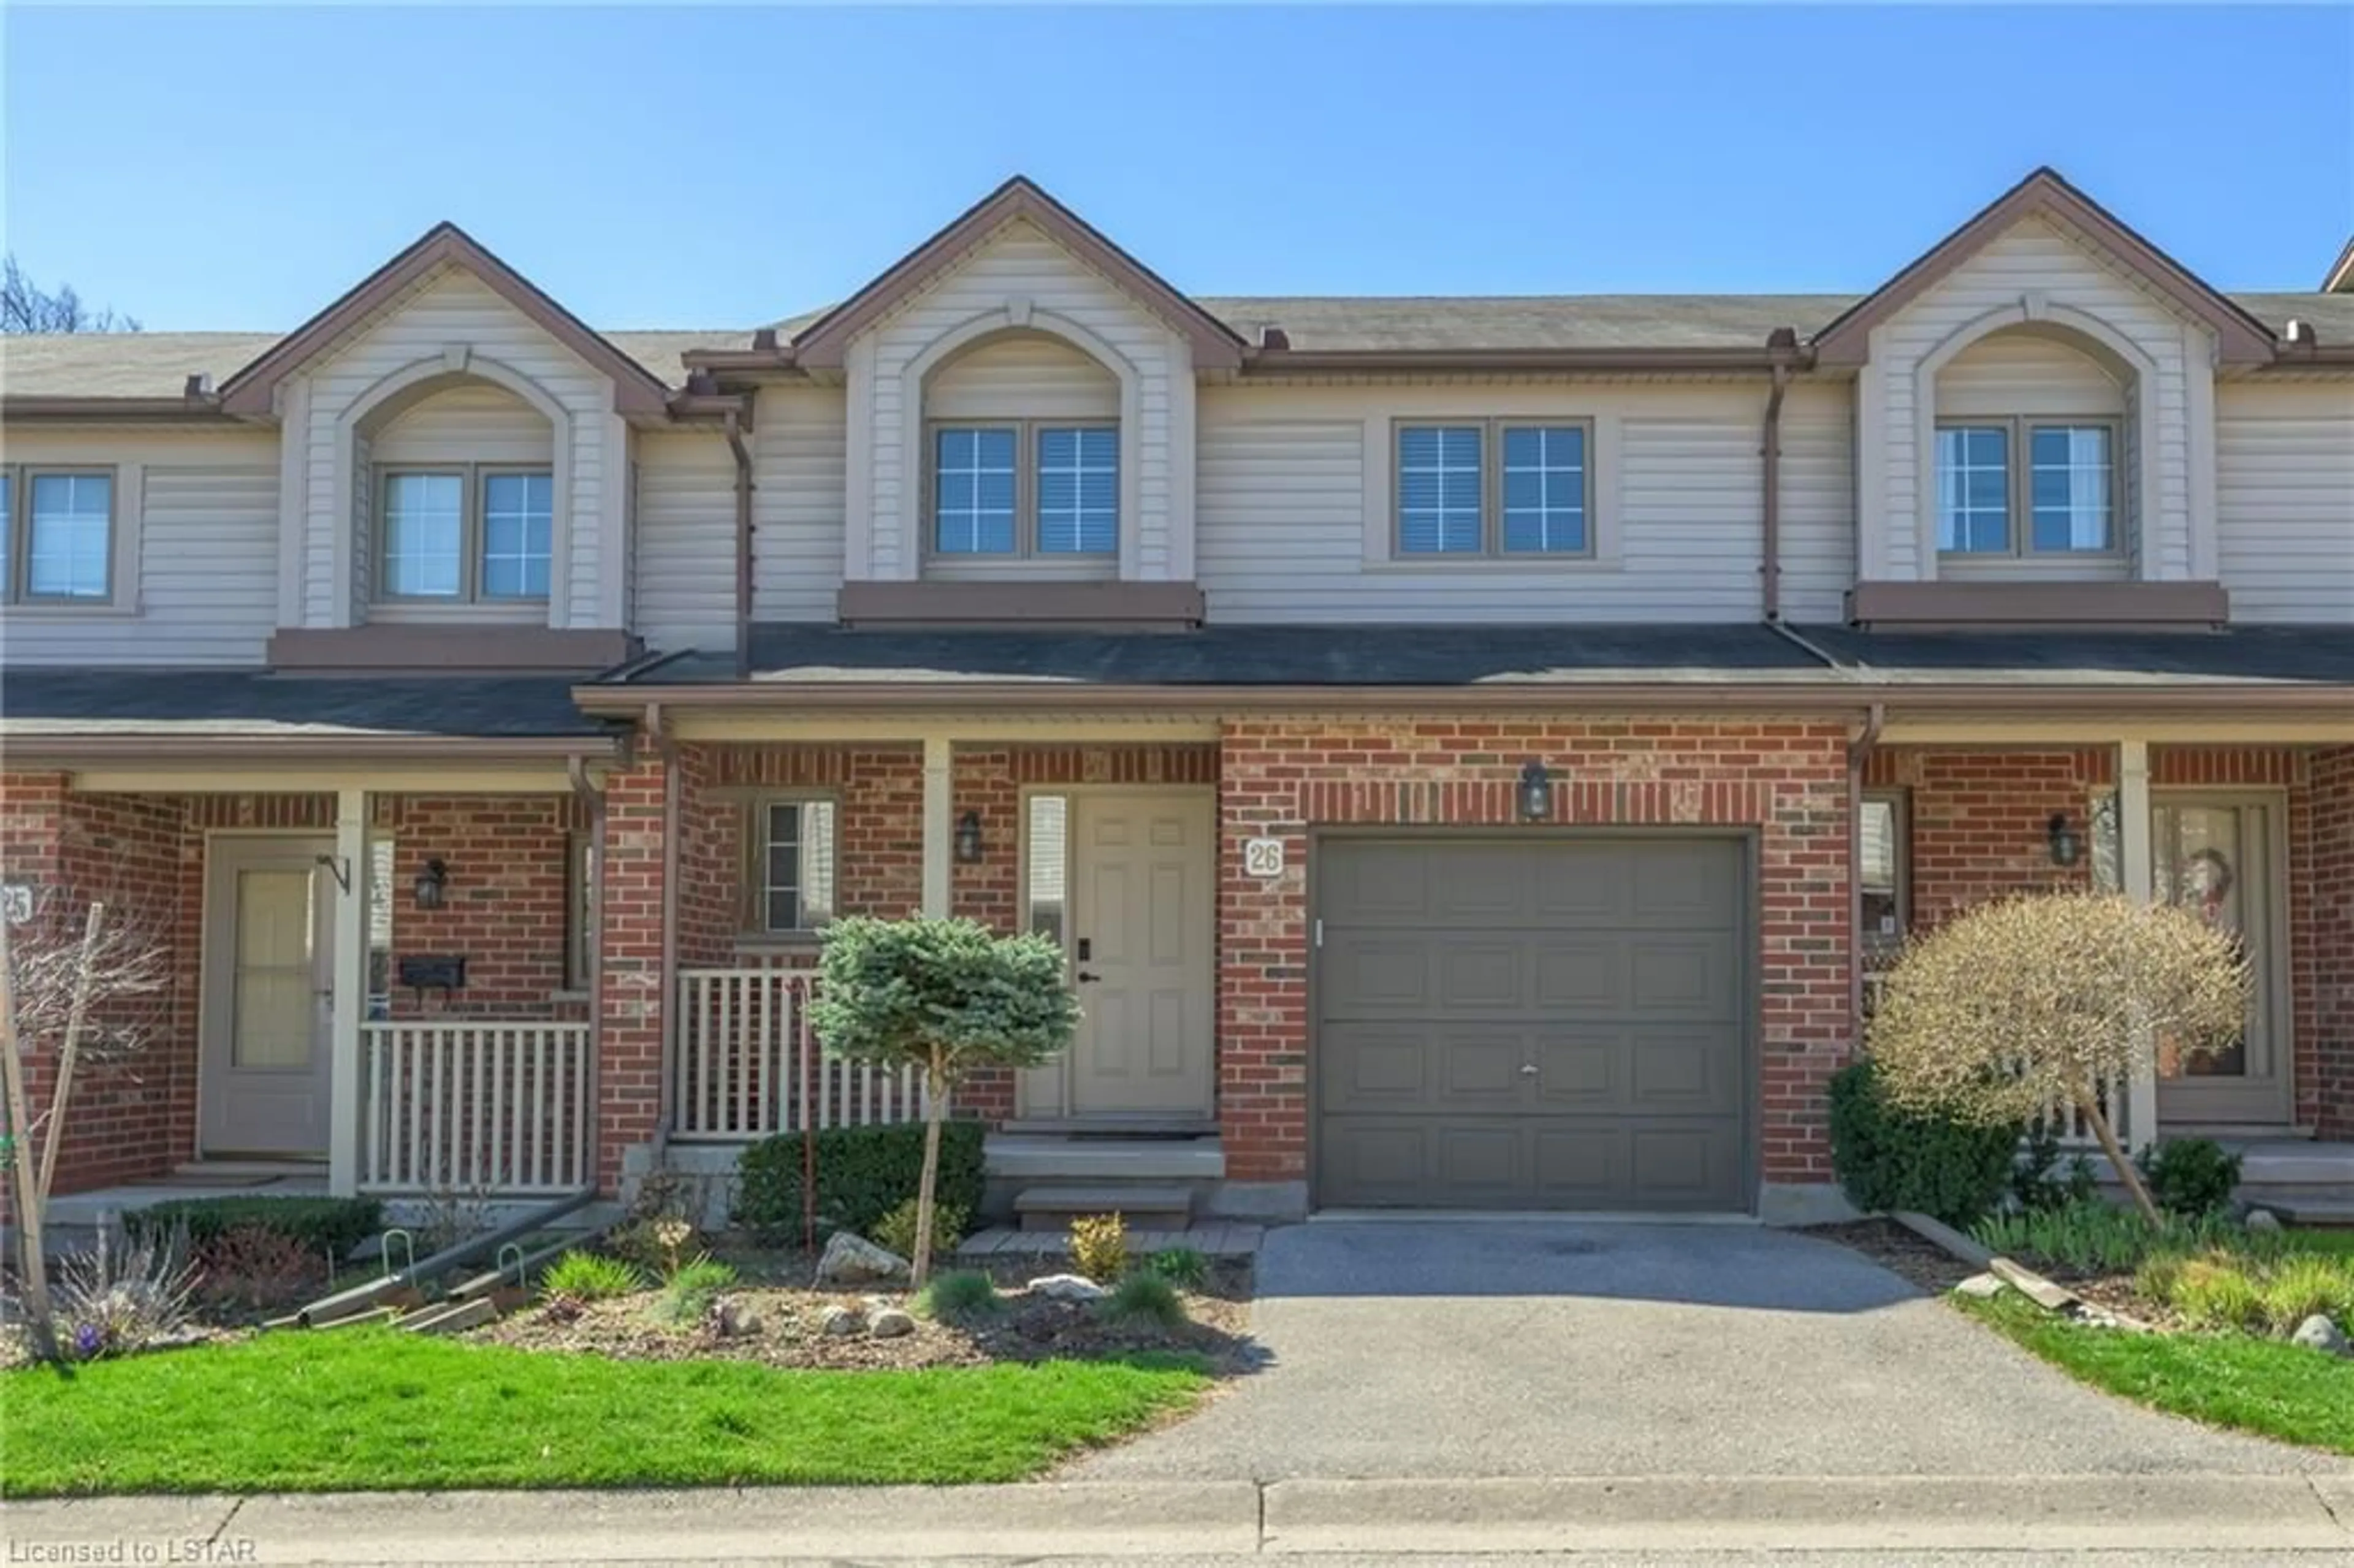 Home with brick exterior material for 1100 Byron Baseline Rd #26, London Ontario N6K 4M3